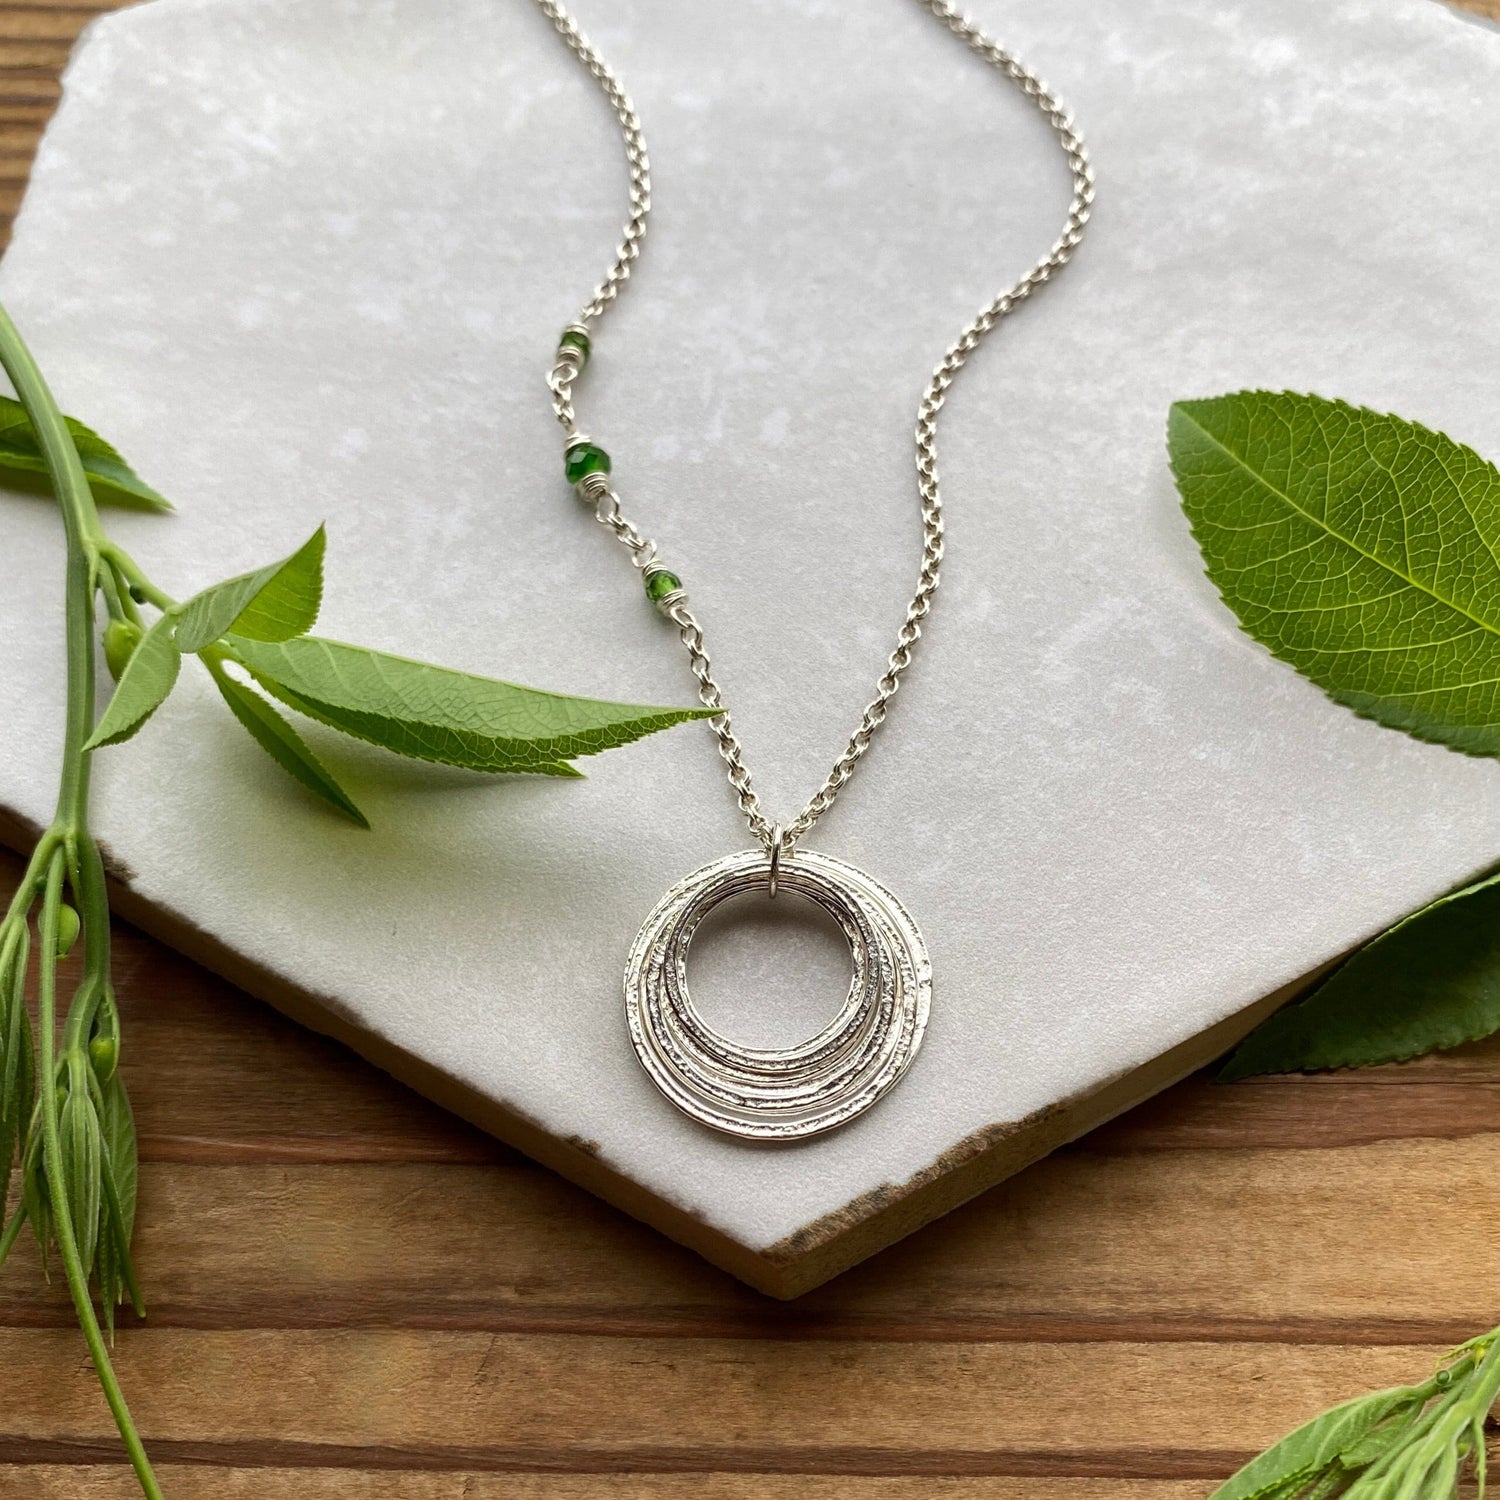 80th Birthday Minimalist Birthstone Necklace, Handcrafted Sterling Silver Seven Circle Pendant, 8 Rings for 8 Decades, 80th Birthday Gift